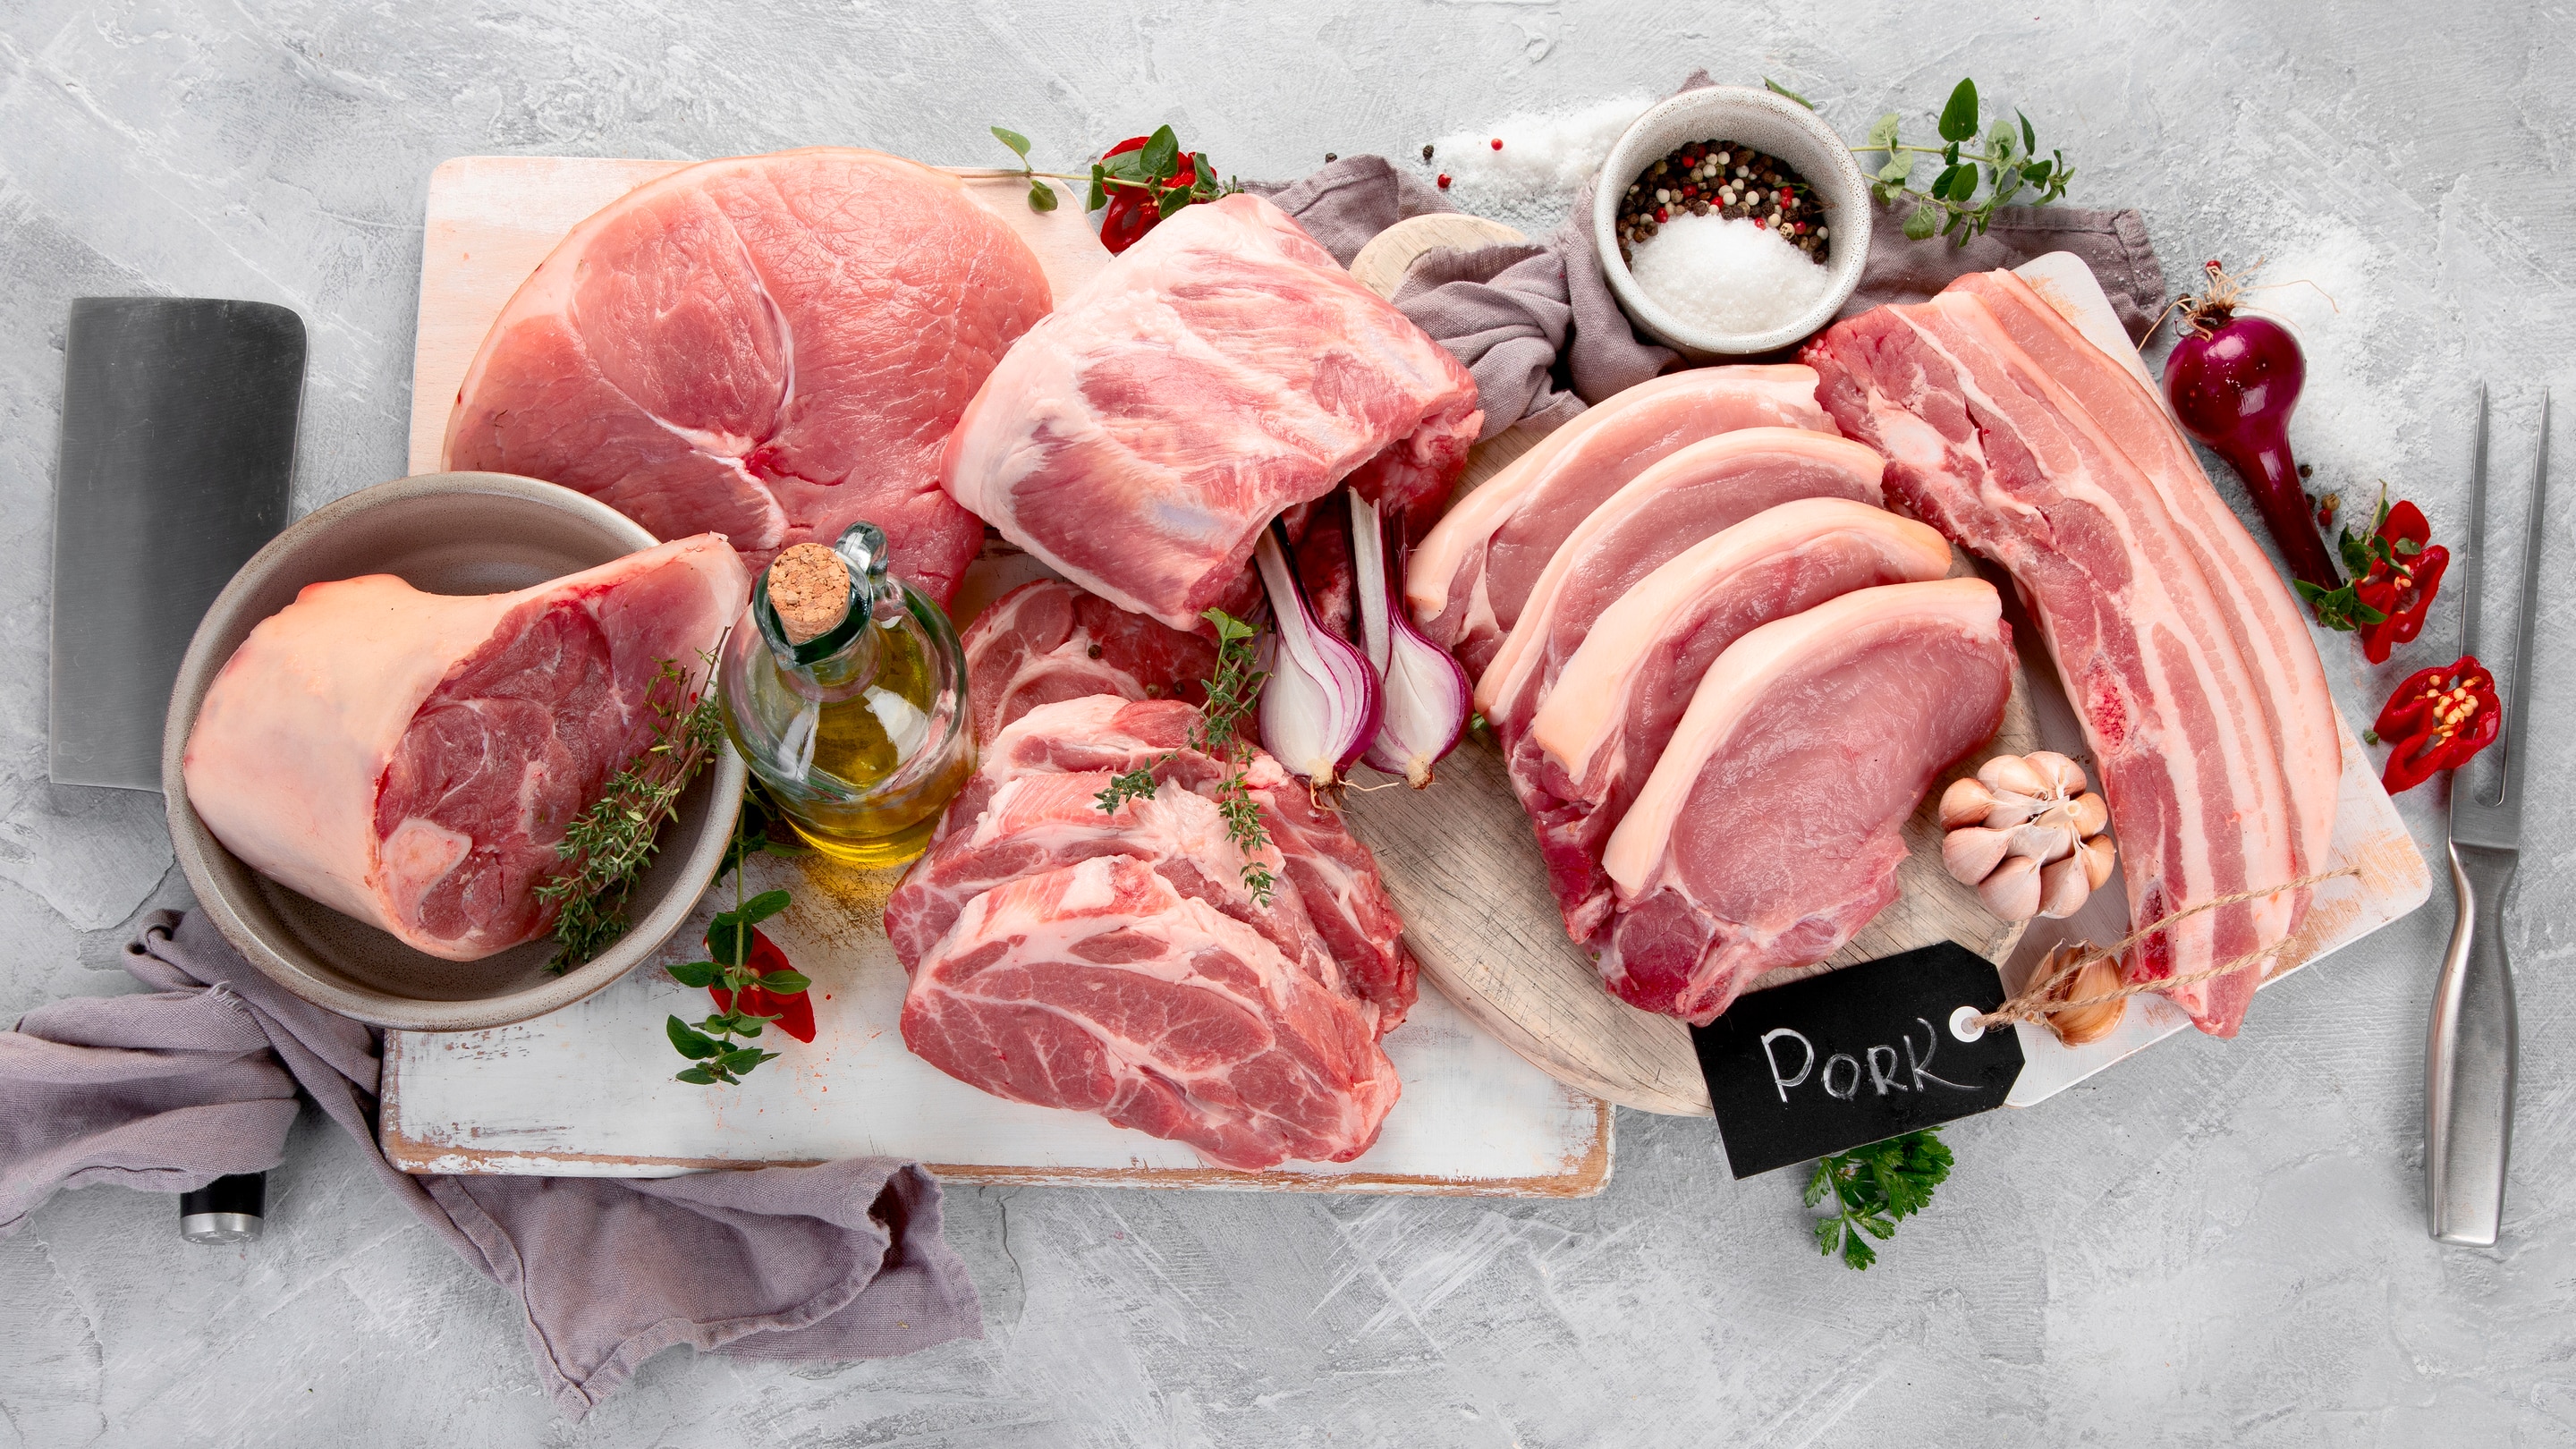 An assortment of different cuts of pork with a bottle of olive oil and herbs as decorations